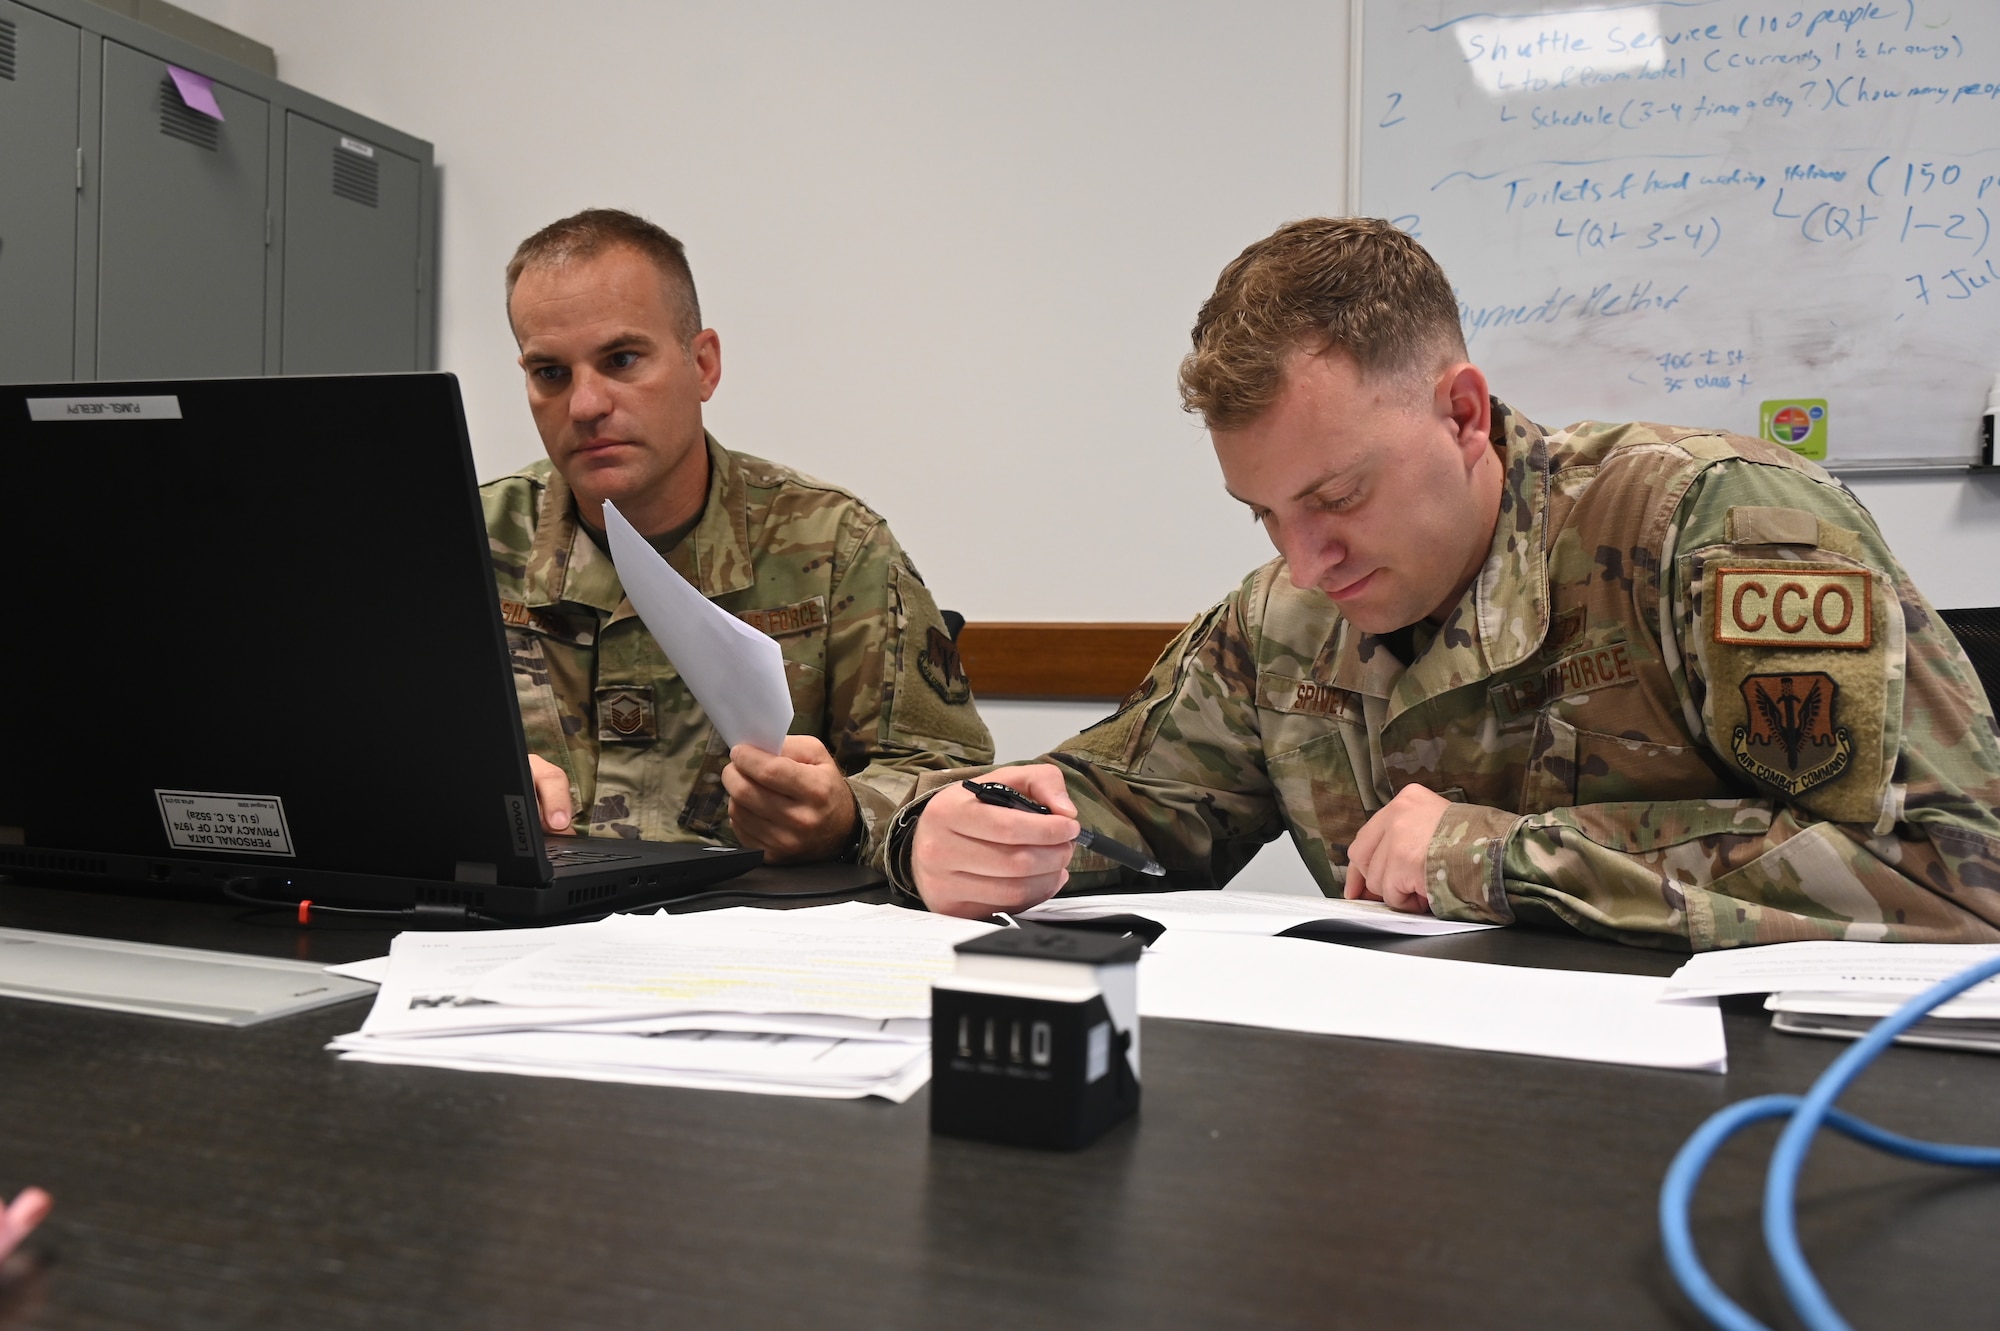 U.S. Air Force Master Sgt. Cory Selfies (left), a contract specialist assigned to the 175th Wing, Maryland Air National Guard and U.S. Air Force Staff Sgt. Evan Spivey, a contract specialist assigned to the 175th Wing, Maryland Air National Guard, worked on various contract writing and file systems during annual training, July 18, 2022, at Aviano Air Base, Italy.